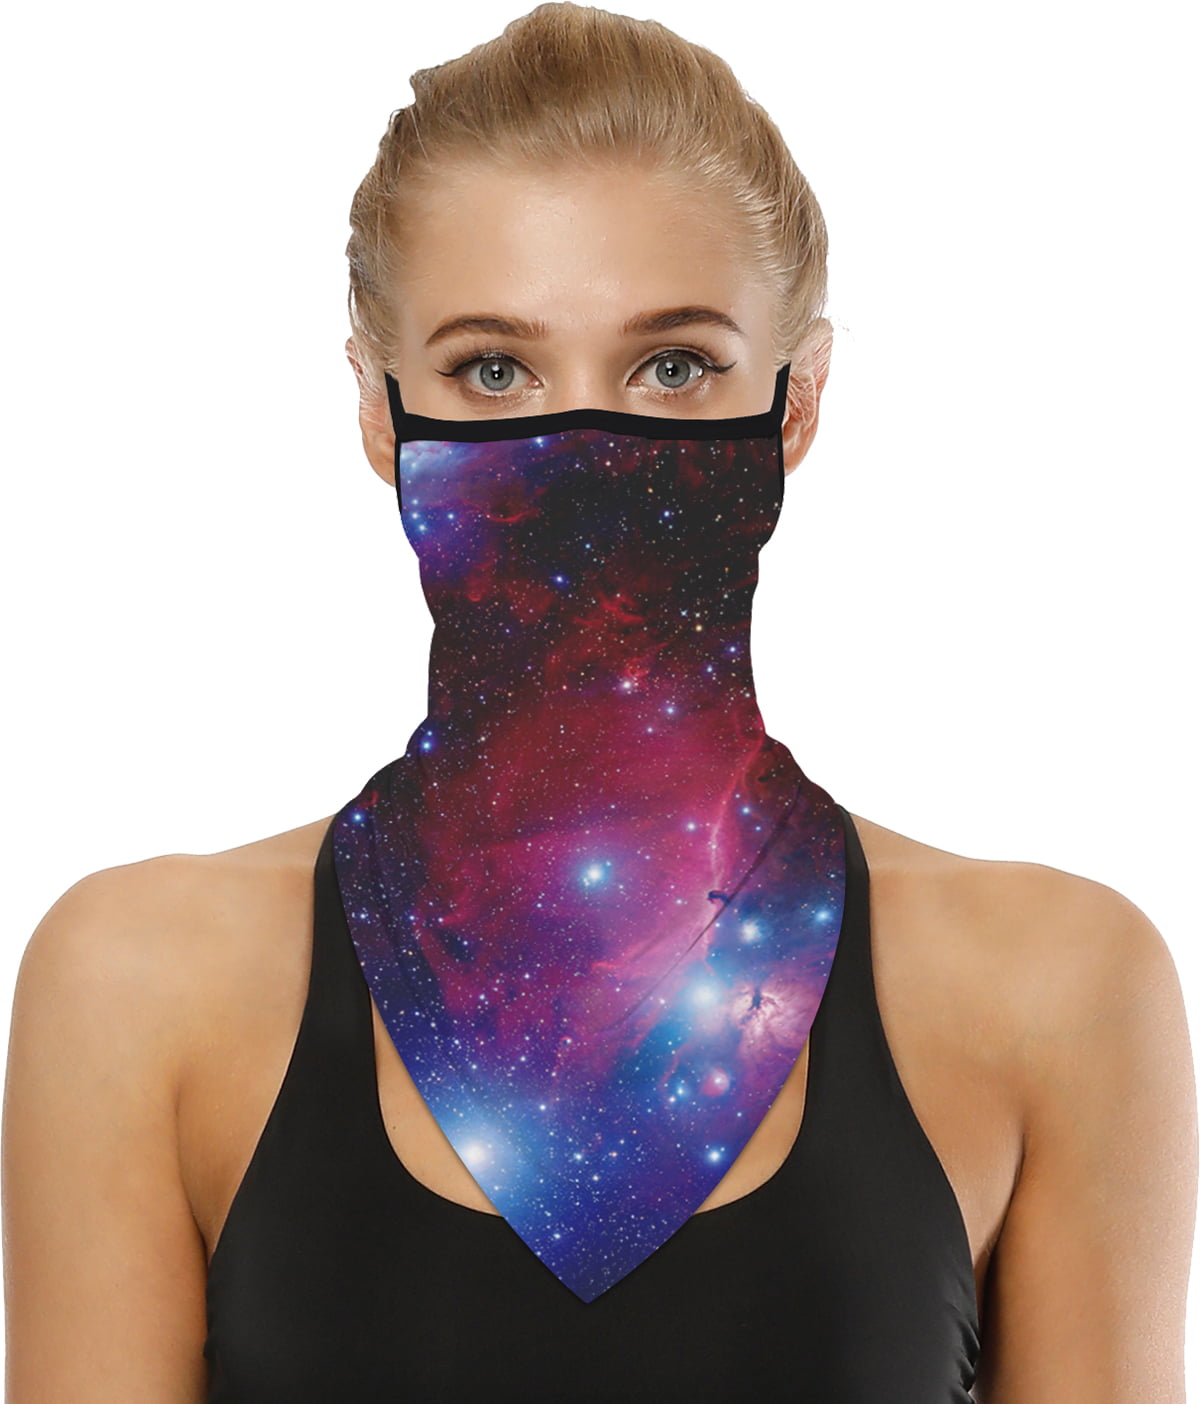 Details about   2PC Neck Gaiter Face Mask Cooling Bandana Breathable Scarf UV Balaclava Headwear 